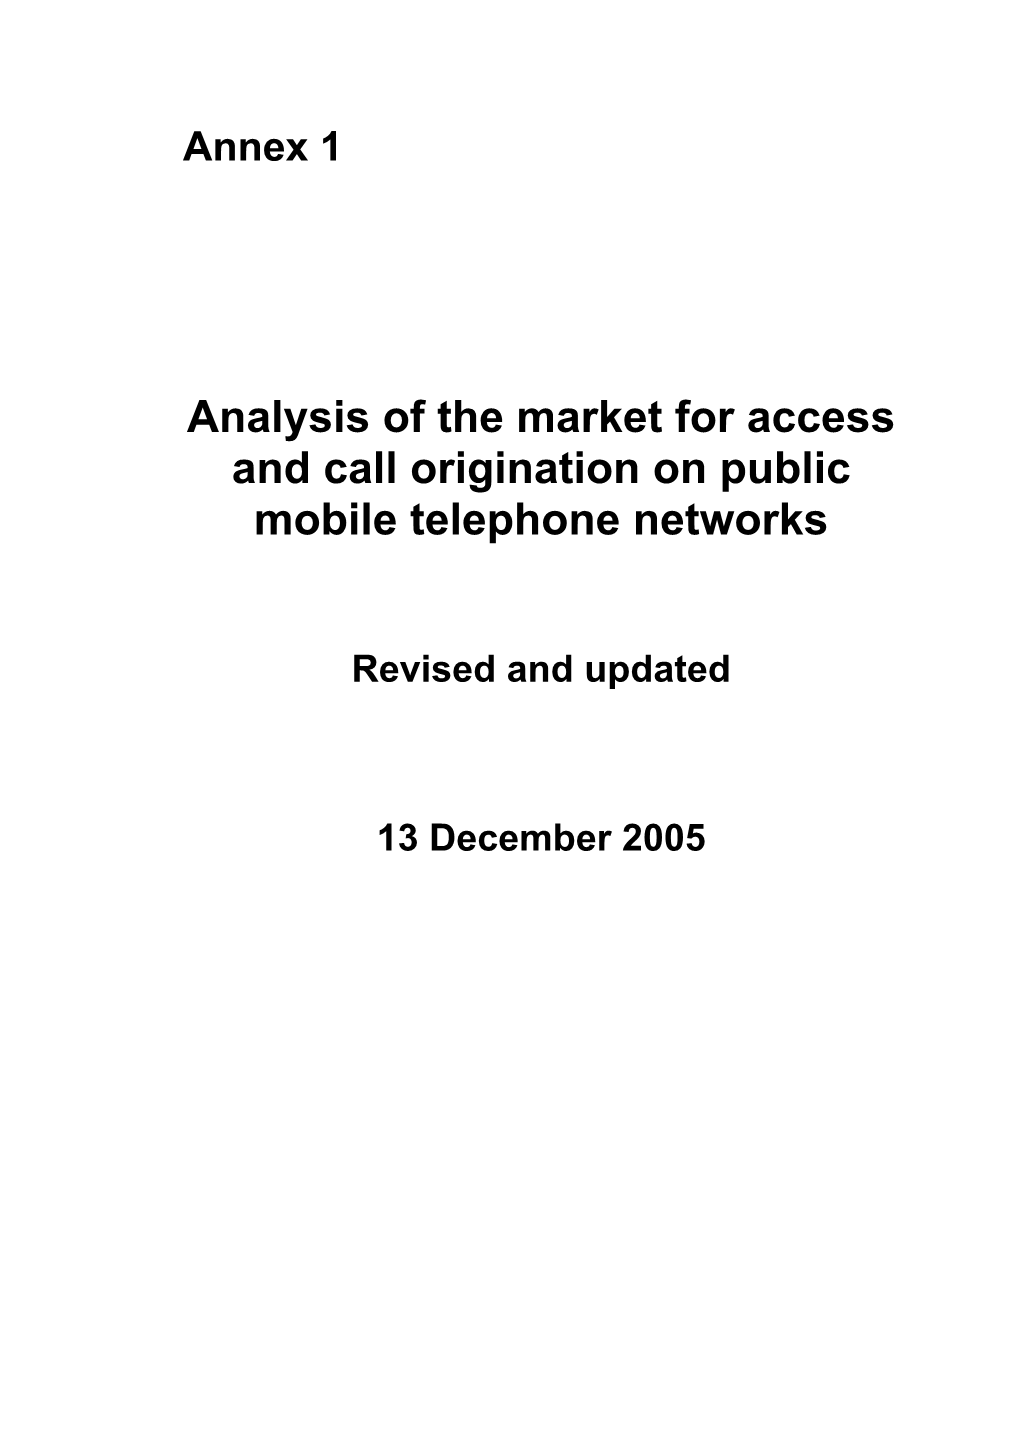 Analysis of the Market for Access and Call Origination on Public Mobile Telephone Networks